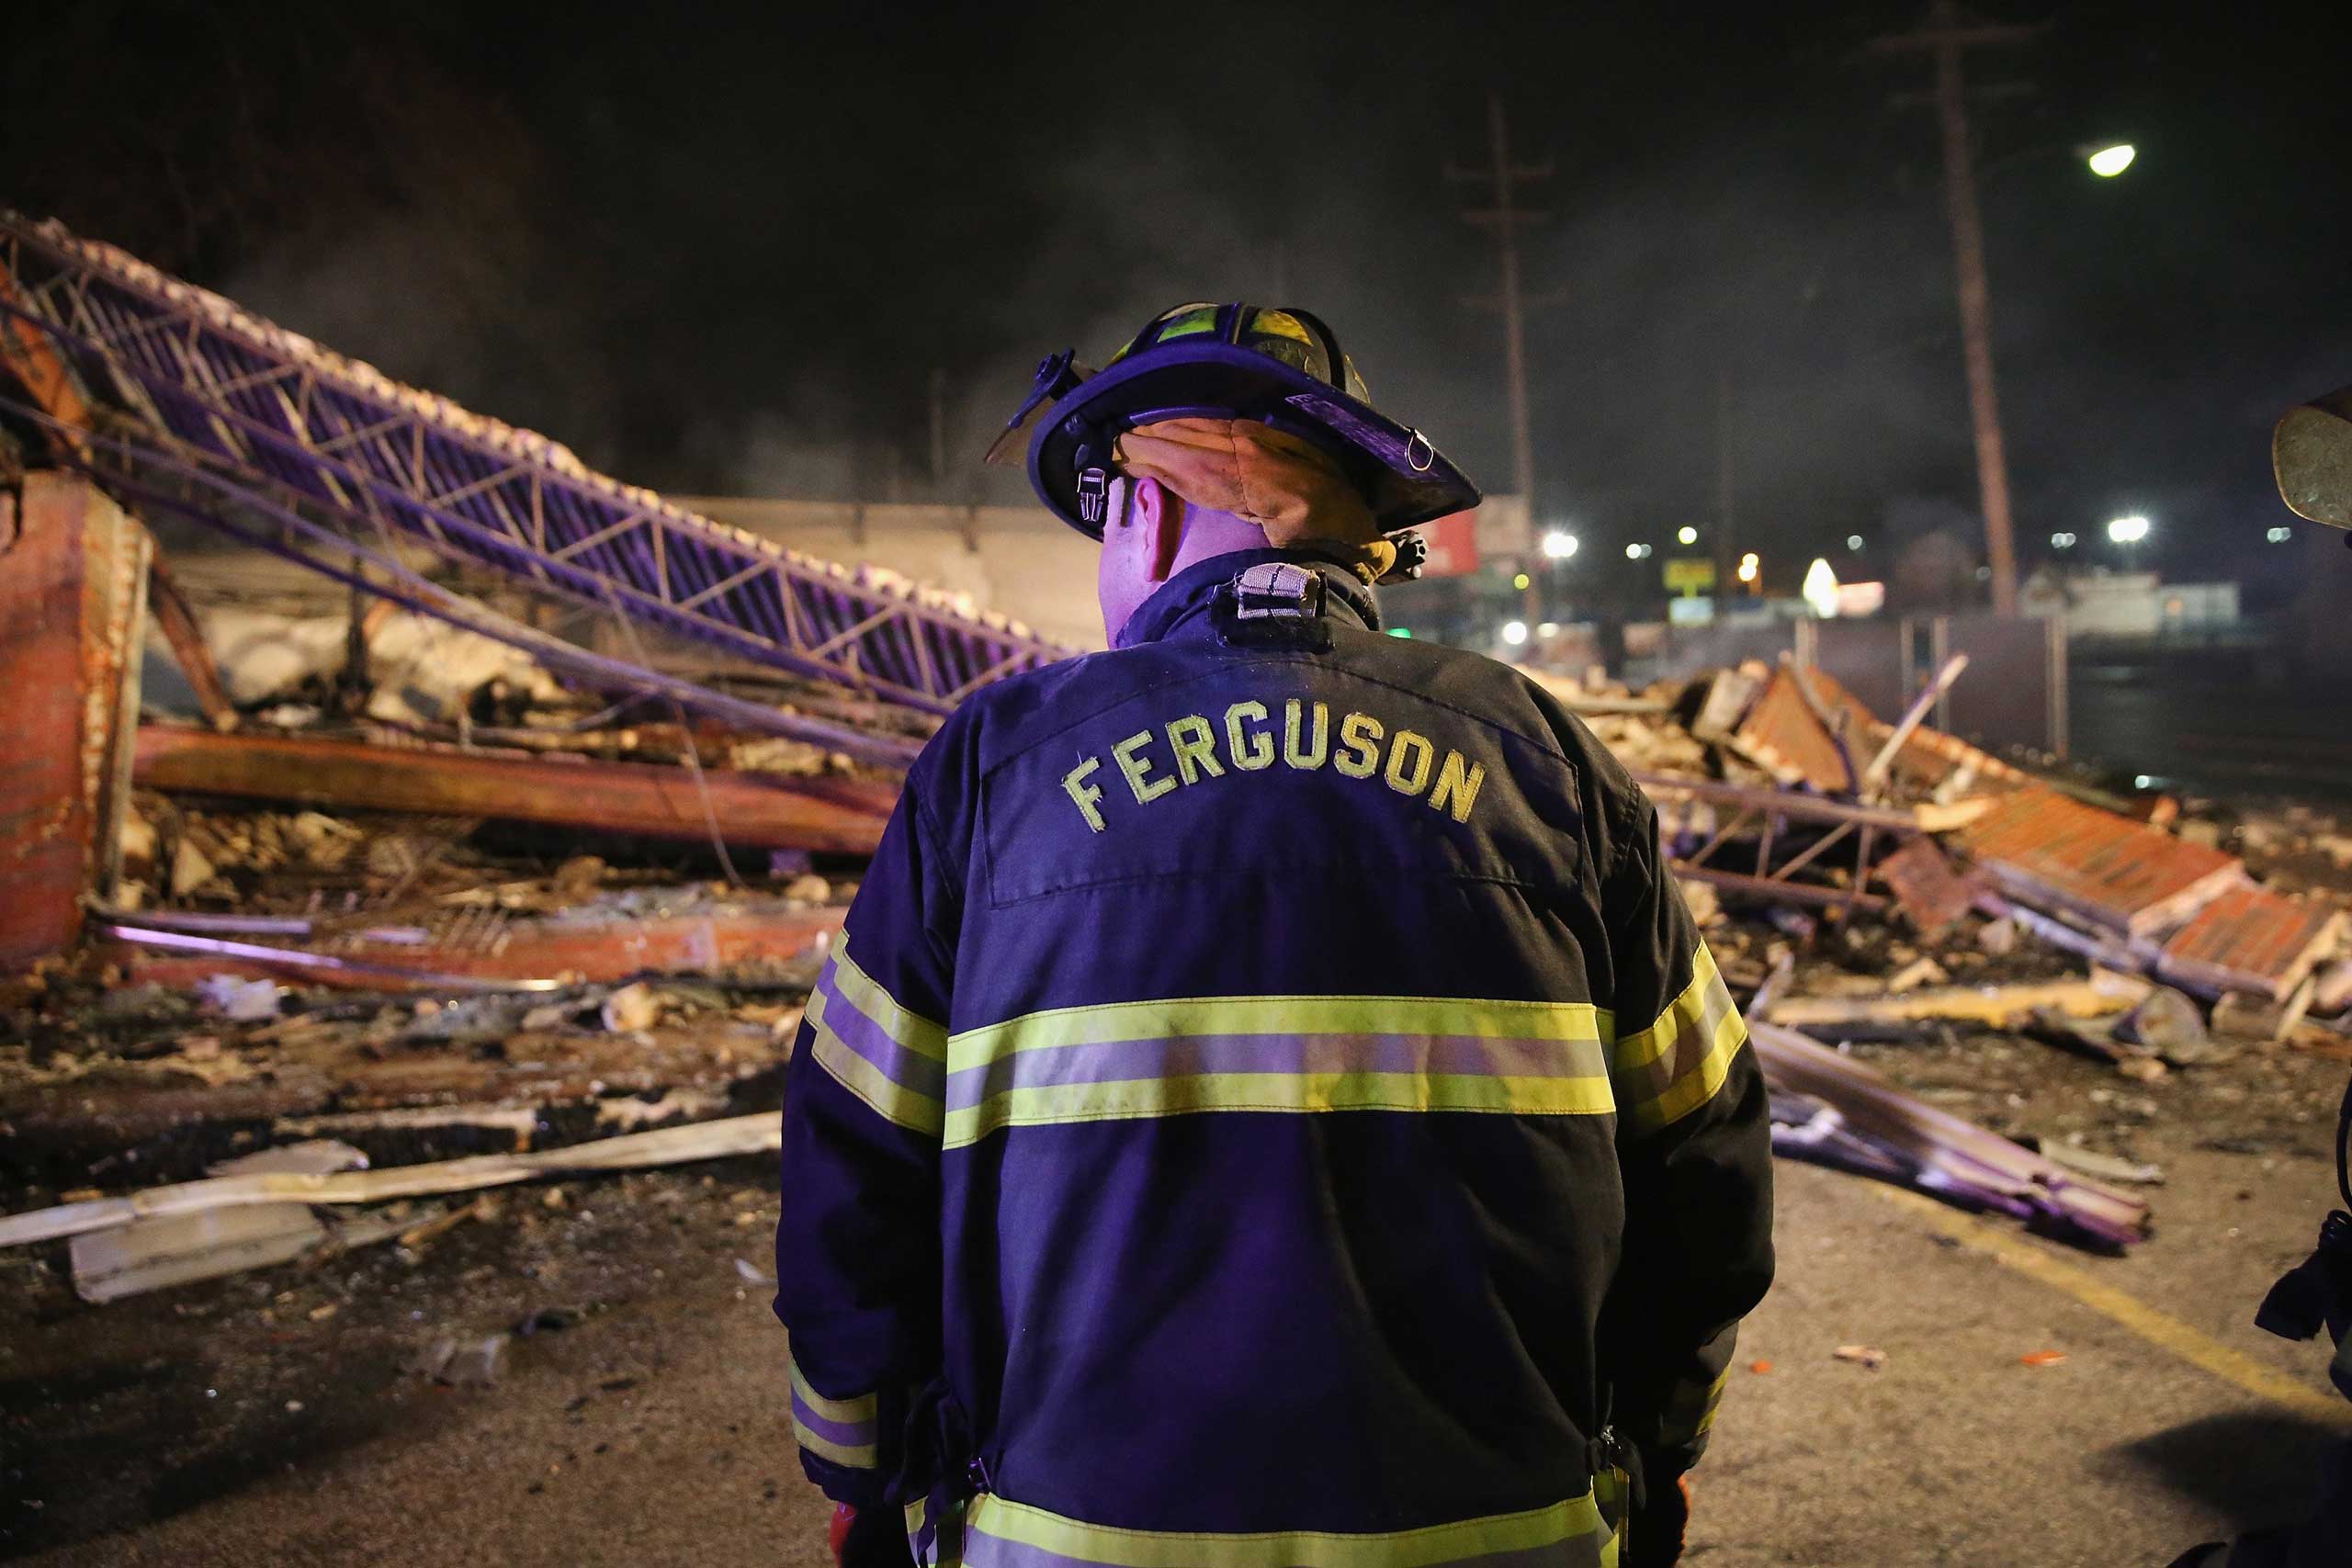 A Ferguson firefighter surveys rubble at a strip mall that was set on fire when rioting erupted following the grand jury announcement in the Michael Brown case on Nov. 25, 2014 in Ferguson, Mo.